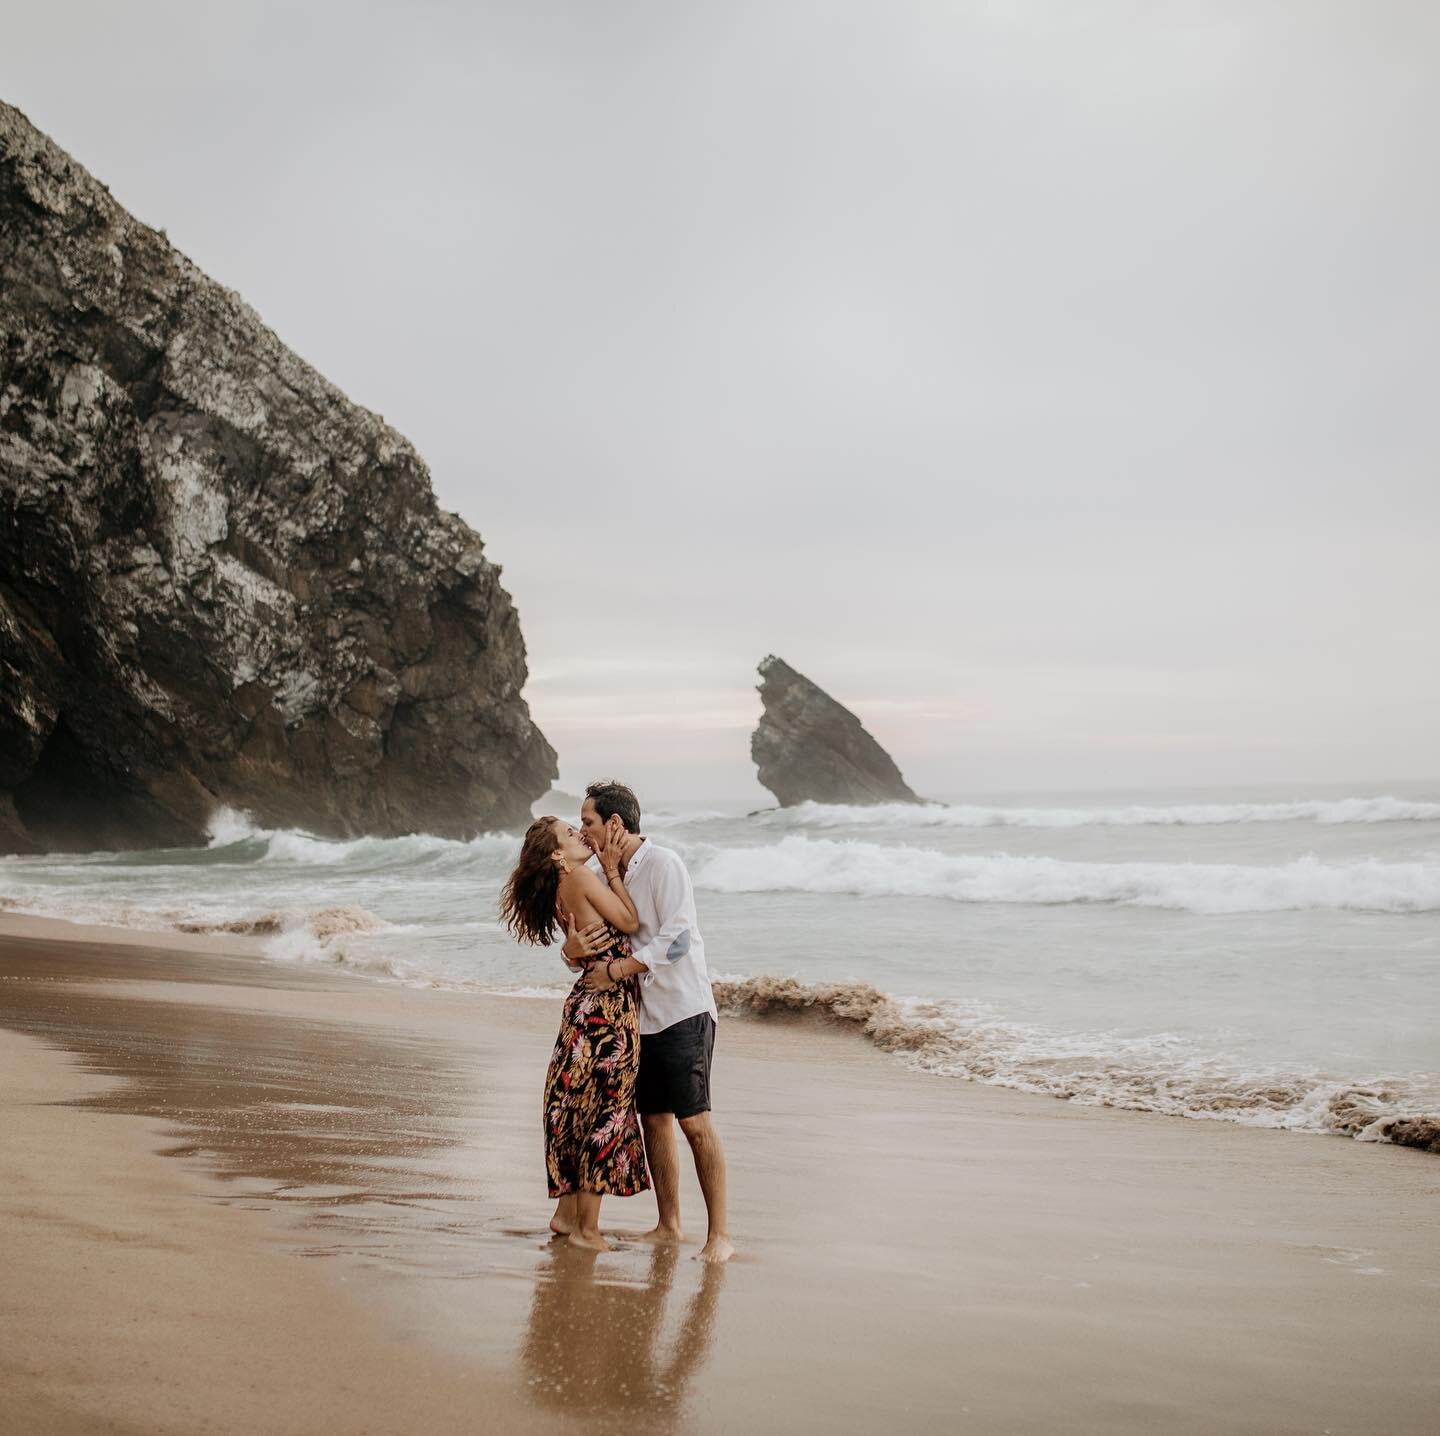 Couldn&rsquo;t have wished for a place more magical to capture the love between these two beautiful beings. #lisbonportugal #lisbonengagementphotographer #lisbonfamilyphotographer #lisbonphotographer #love #sintra #amor #portugal #portugalelopement